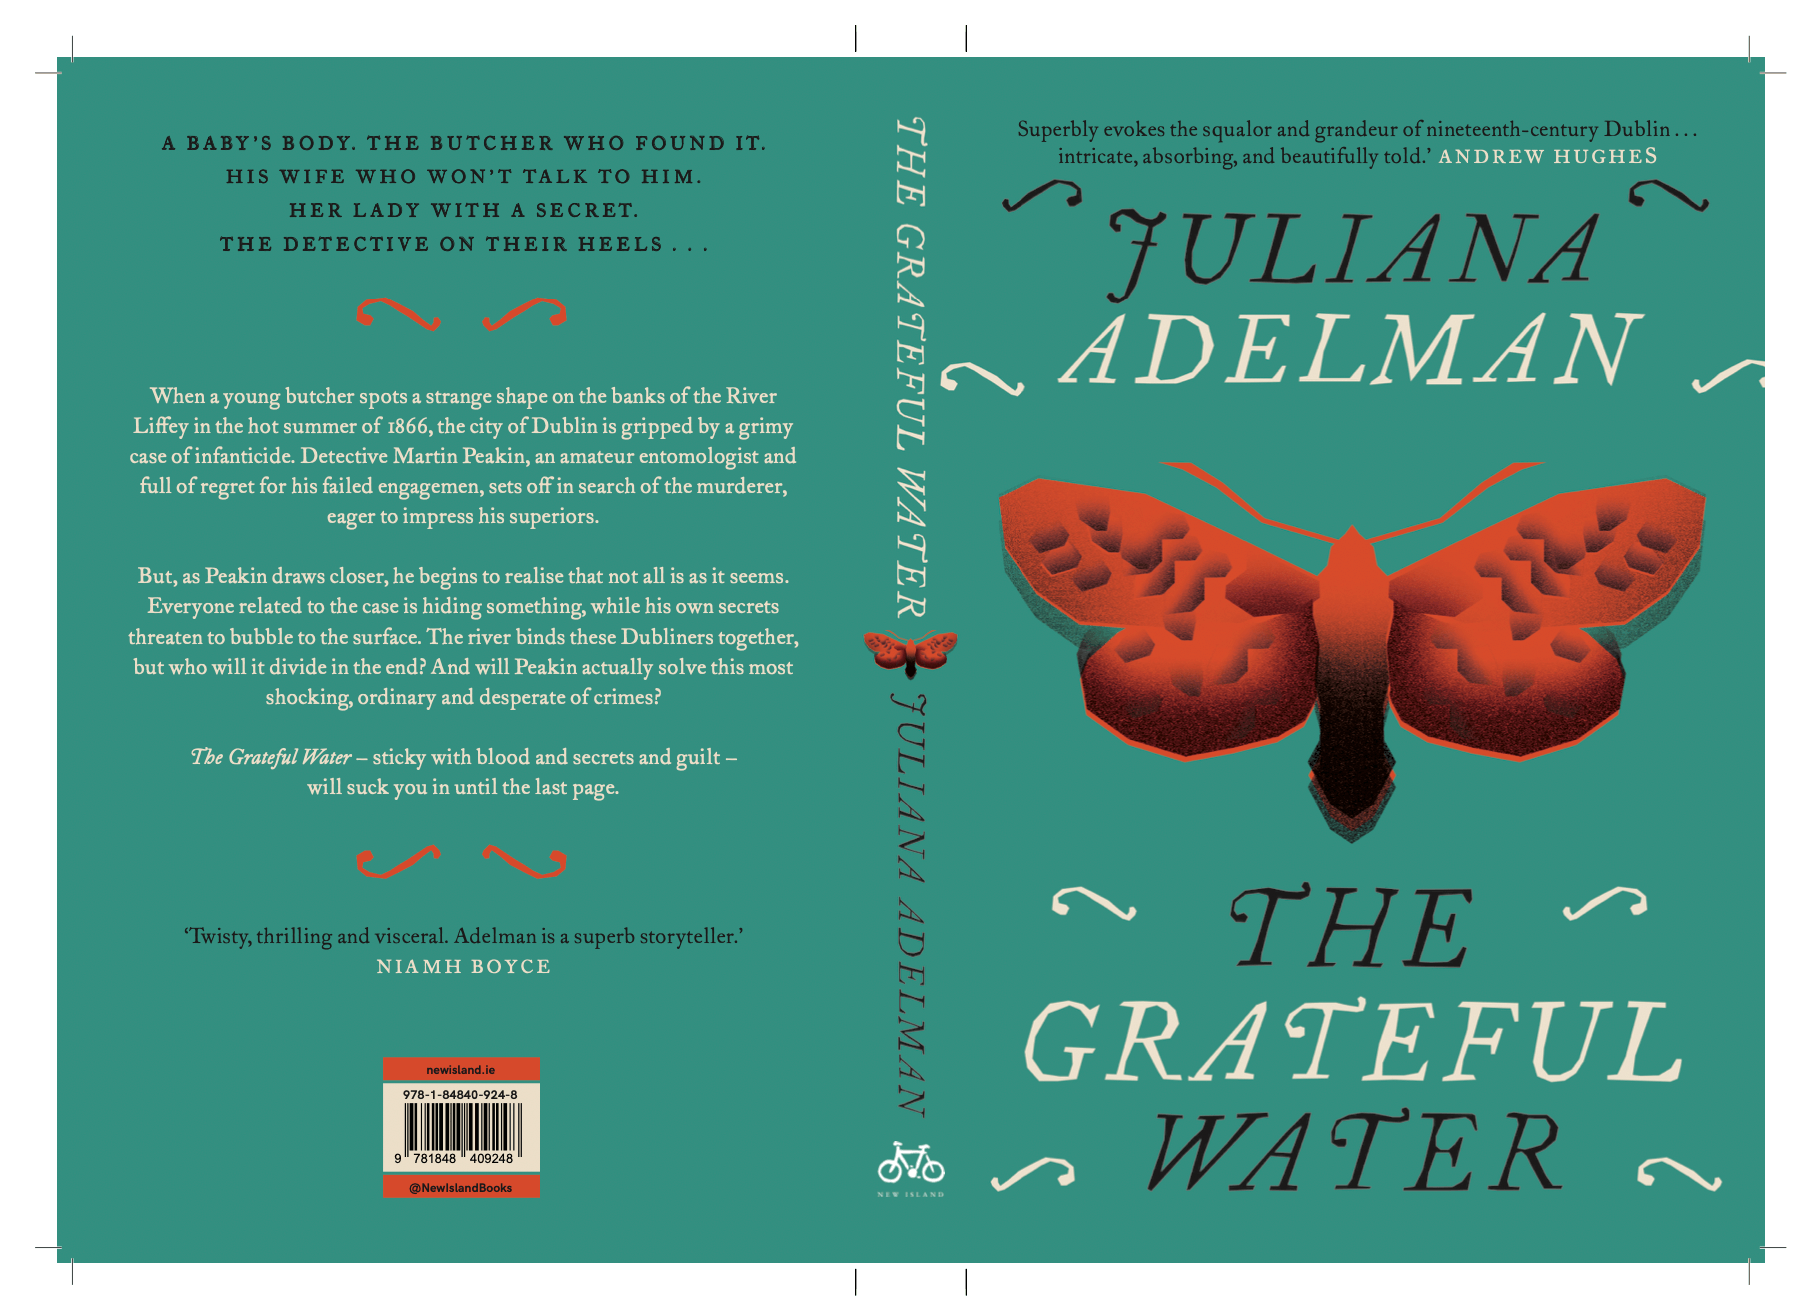 the grateful water full layout.png